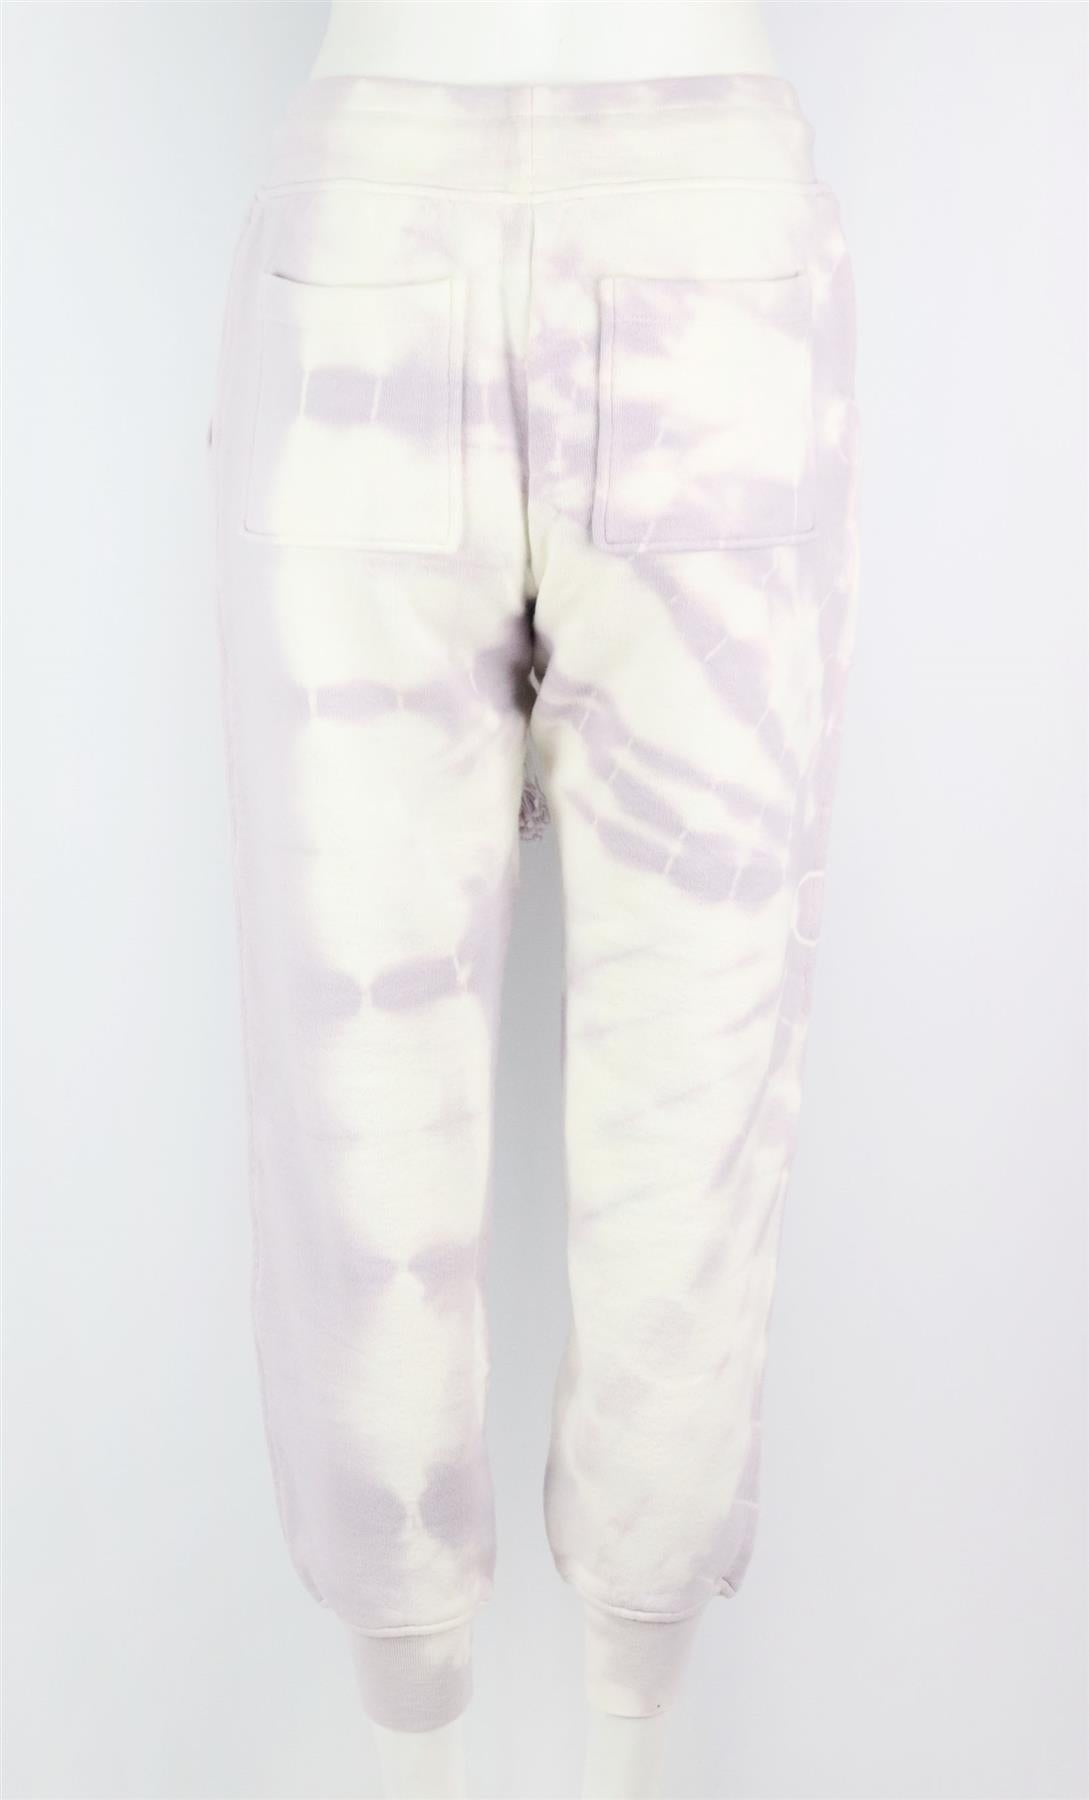 ULLA JOHNSON TIE DYED COTTON TERRY TRACK PANTS SMALL